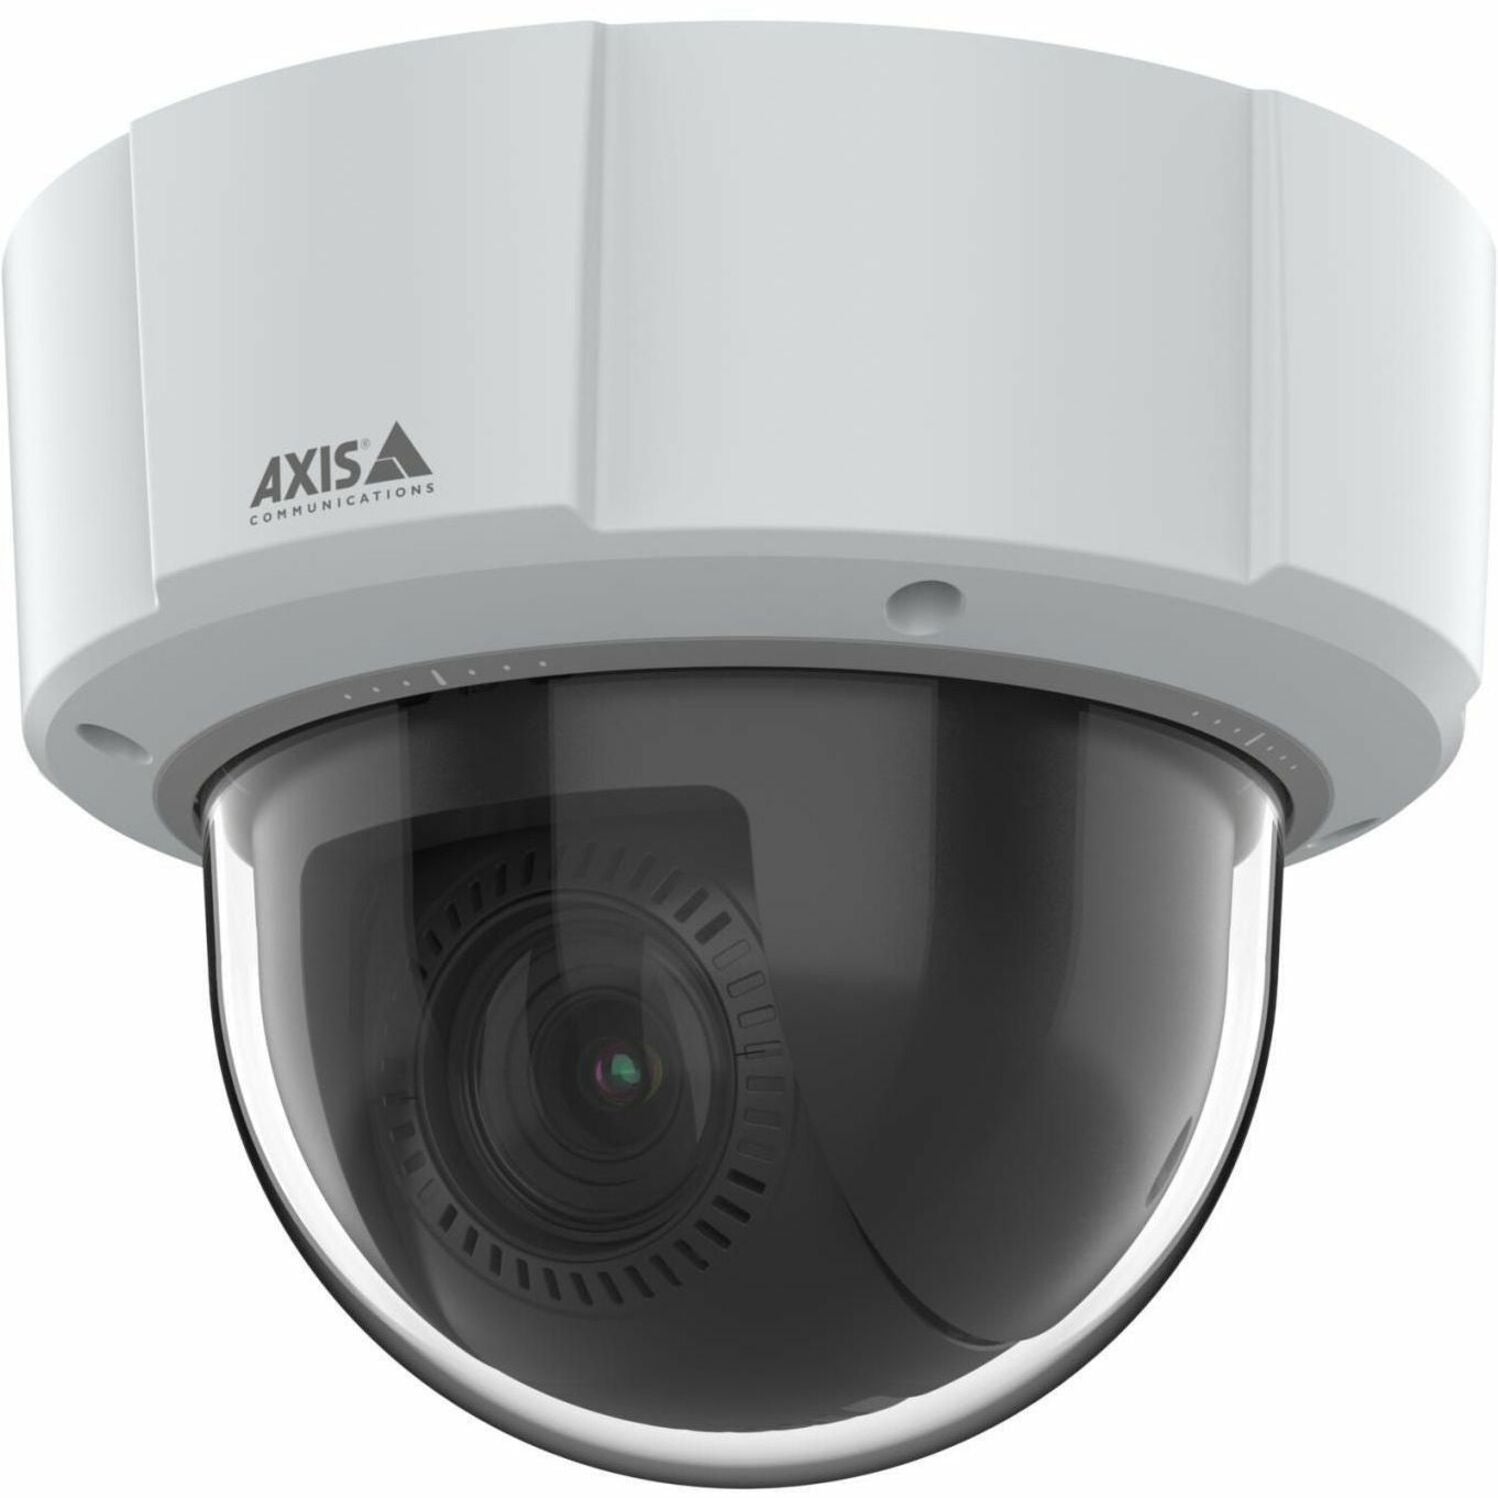 AXIS M5526-E 4 Megapixel Indoor/Outdoor Network Camera - Color - Dome - White (02769-001)